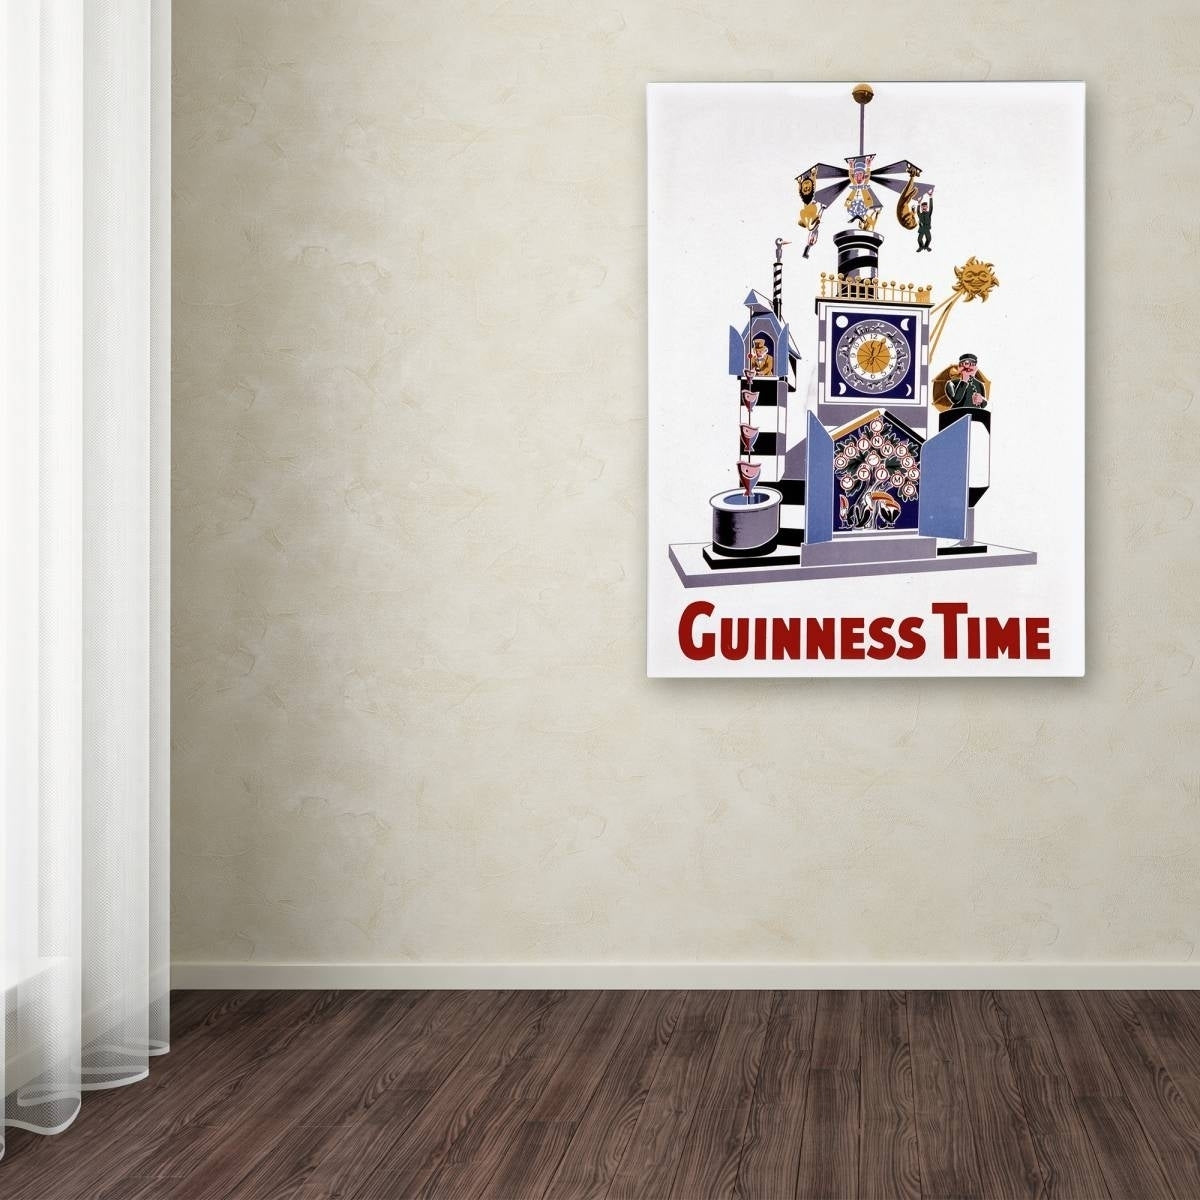 A pop art Guinness Brewery 'Guinness Time I' Canvas Art poster adorns the wall of a room, capturing the essence of the iconic brewery.